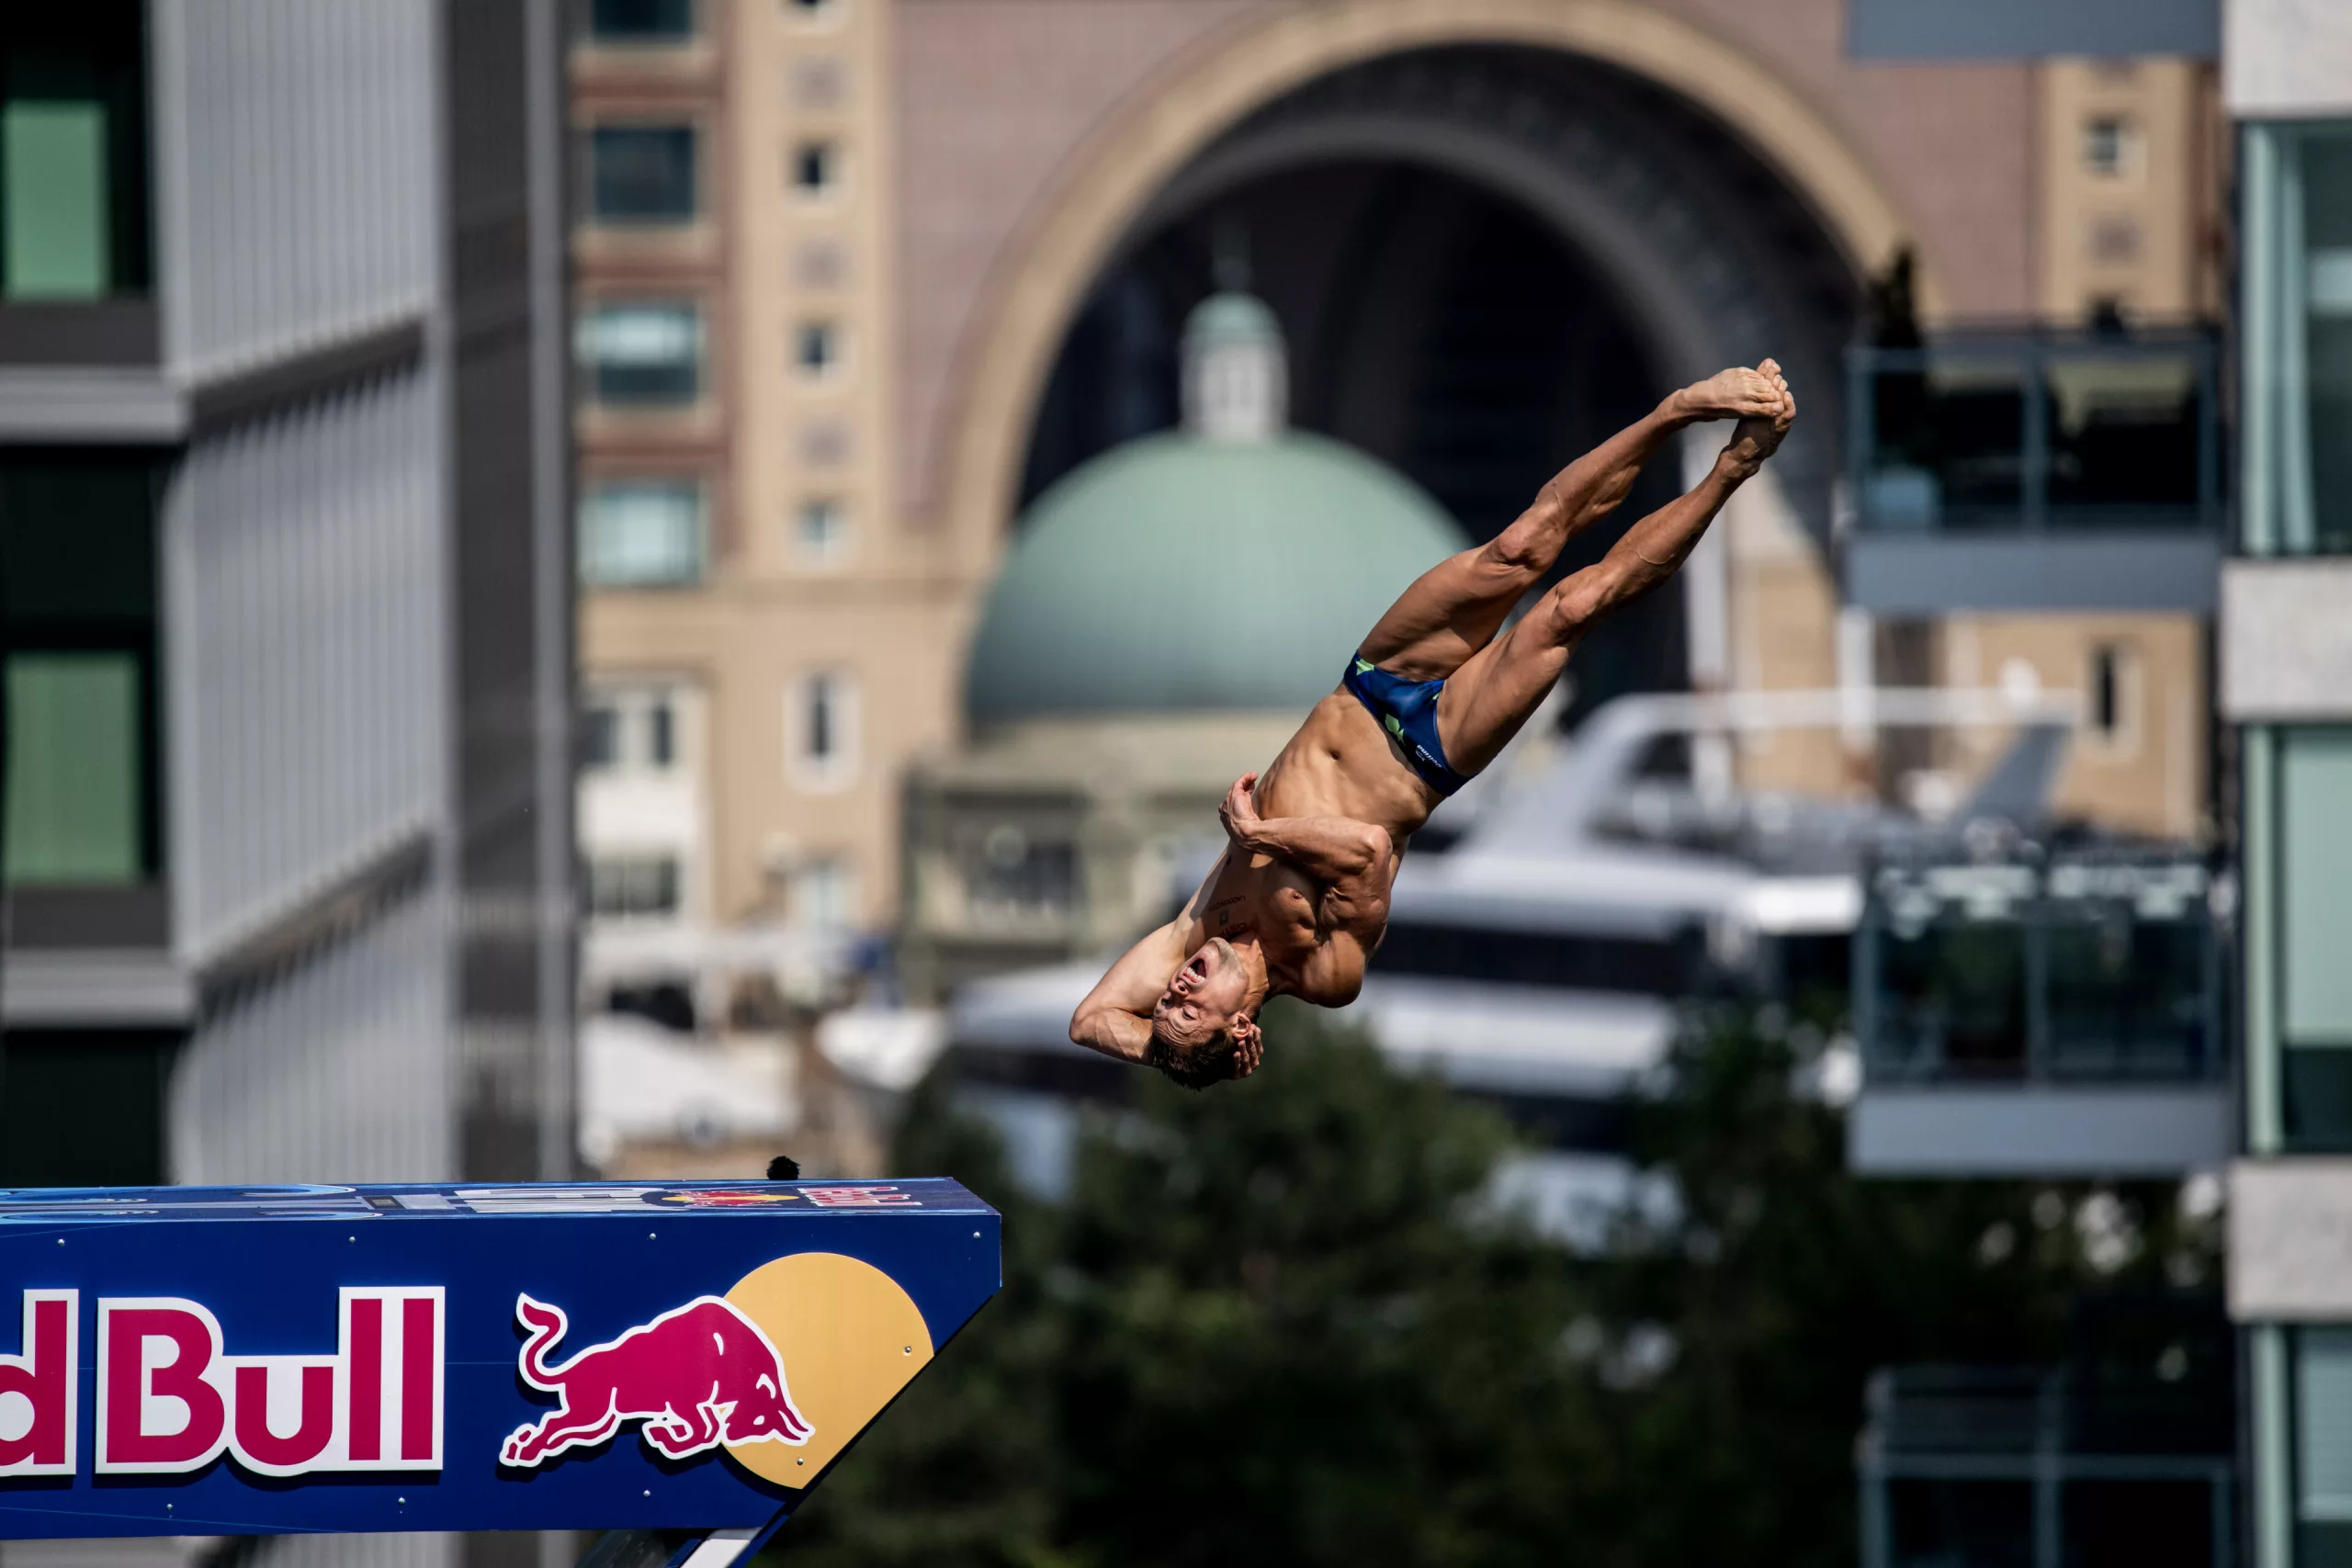 Thrilling Red Bull Cliff Diving World Series Kicks Off in Boston, Showcasing Spectacular Dives and Stunning Results